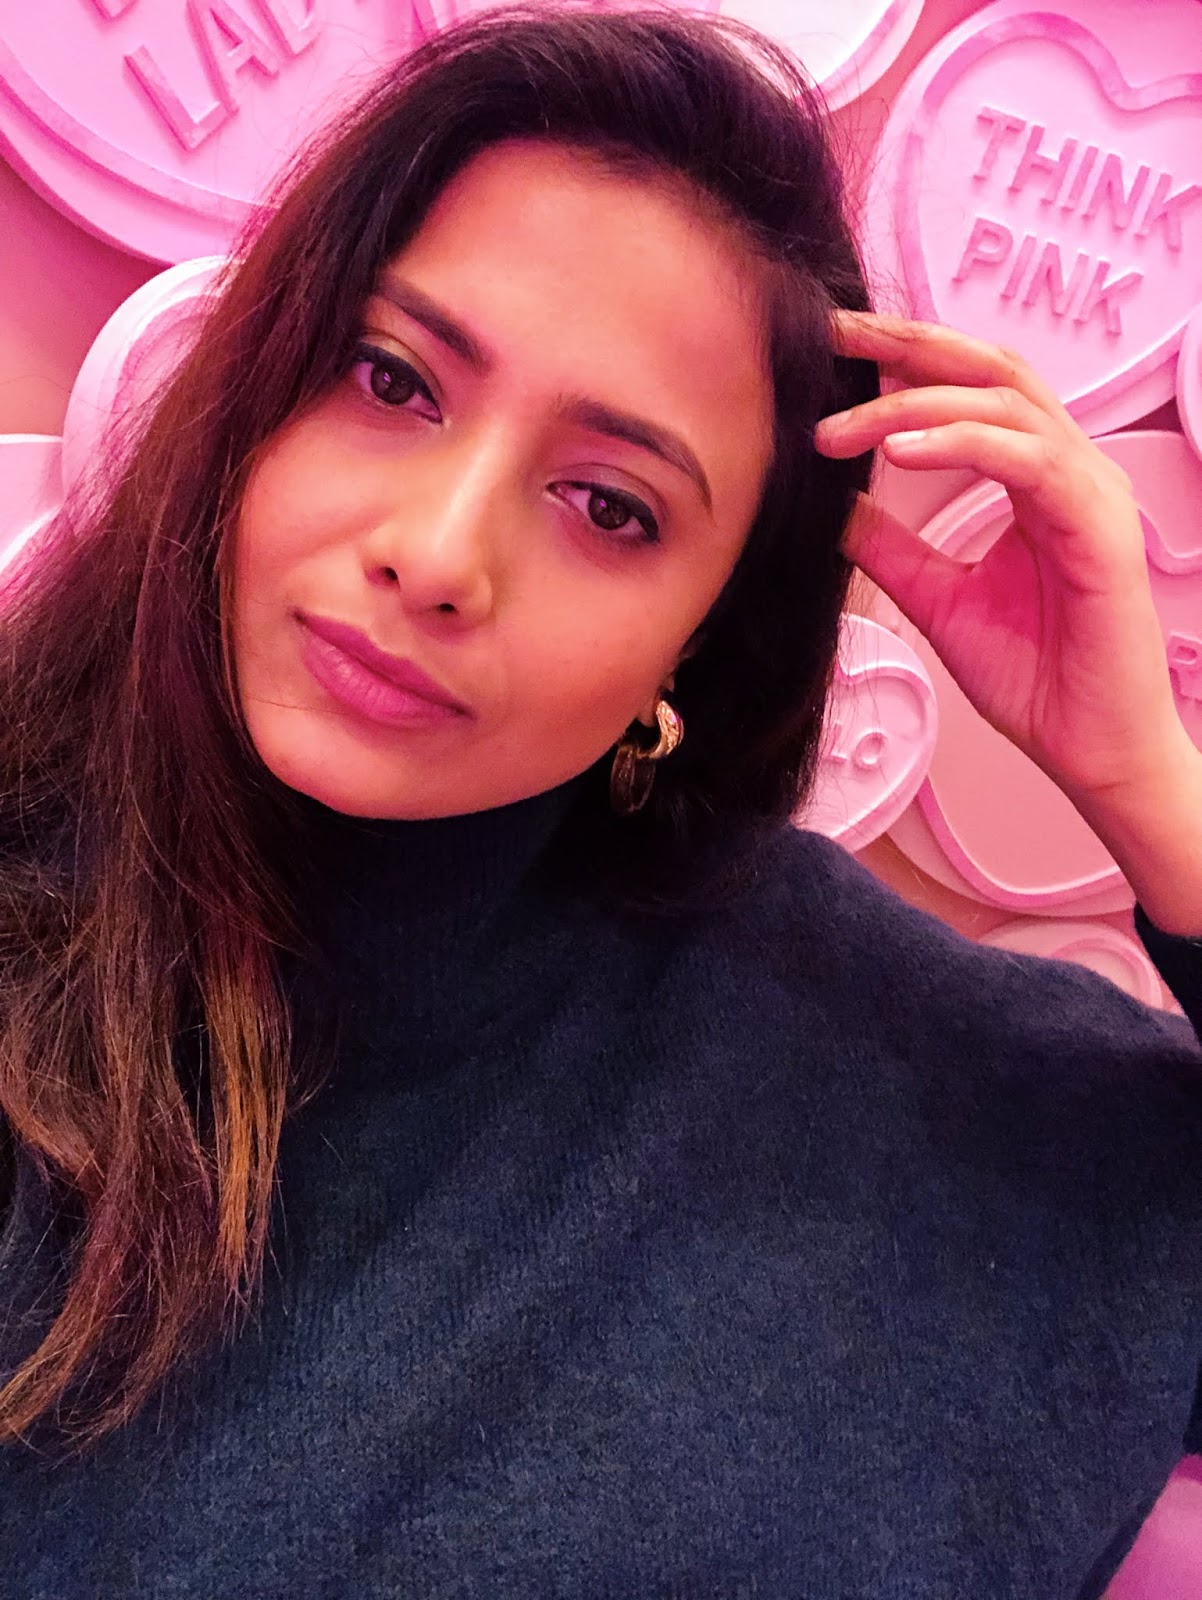 elan cafe hans crescent, london instagram cafe, cute cafe london, pink and green, spring in london, h&m jumper, pink wall london, a slow style, london blog, indian blogger, london blogger